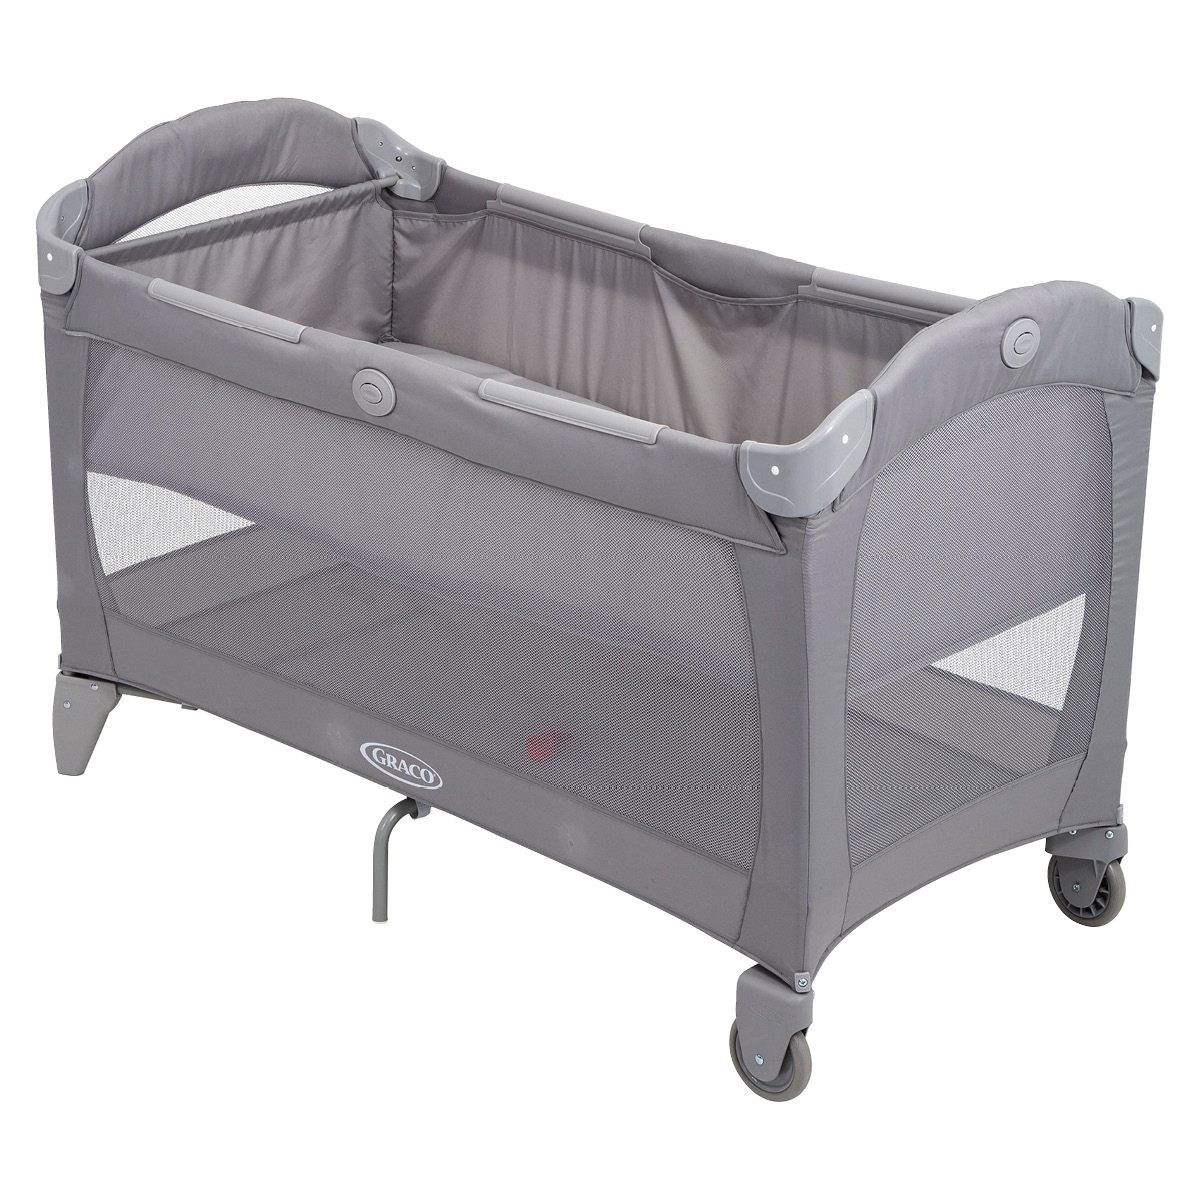 Graco Roll a Bed three quarter angle